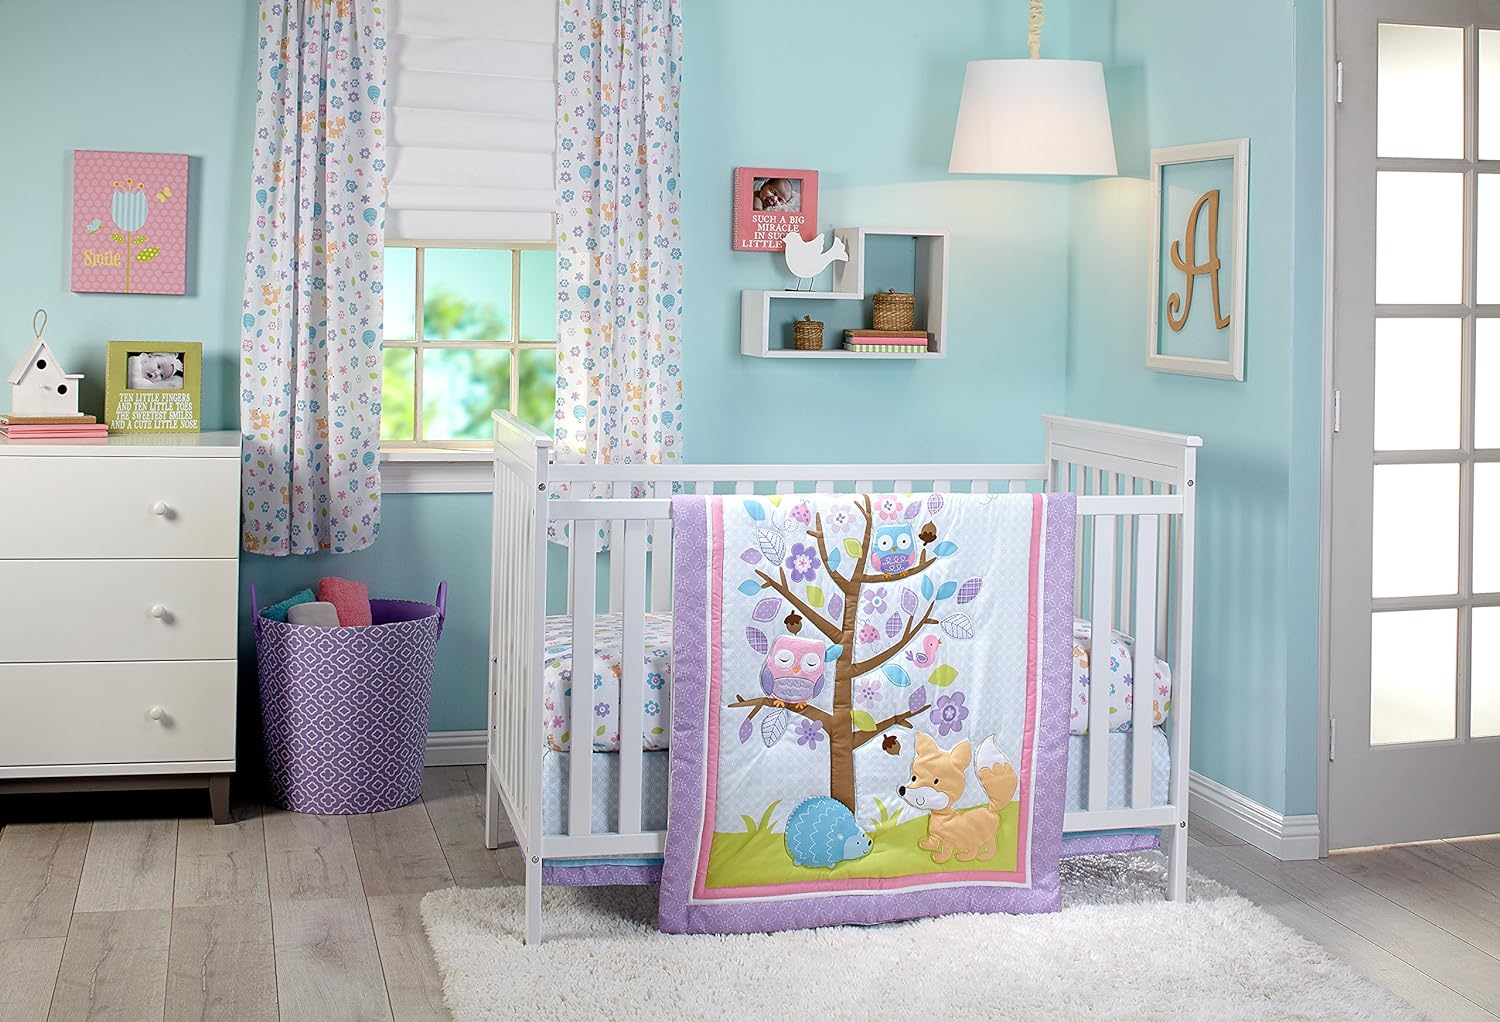 NoJo Little Love Adorable Orchard 3 Piece Set: A Delightful Addition to Your Baby's Nursery